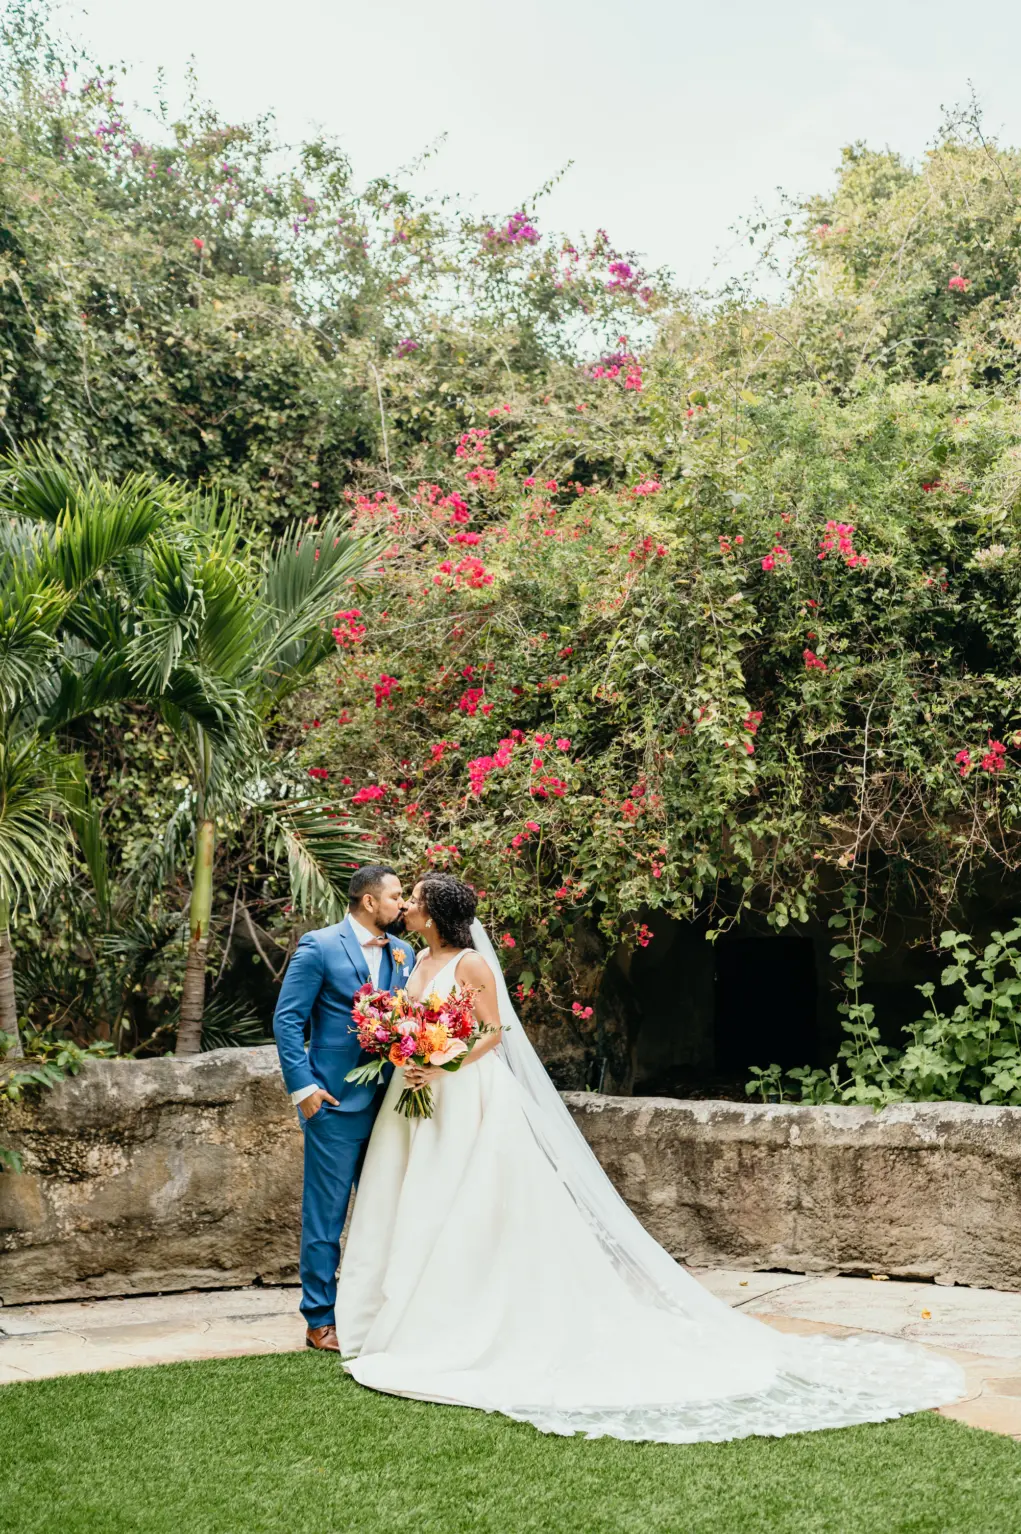 Bride and Groom Just Married Wedding Portrait | Tropical Bridal Bouquet with Red King Protea, Orange Pincushion Protea, Pink Roses, Orchids, and Palm Leaves | St Pete Florist Save The Date Florida | Tampa Bay Event Planner EventFull Weddings | Outdoor Venue Sunken Gardens